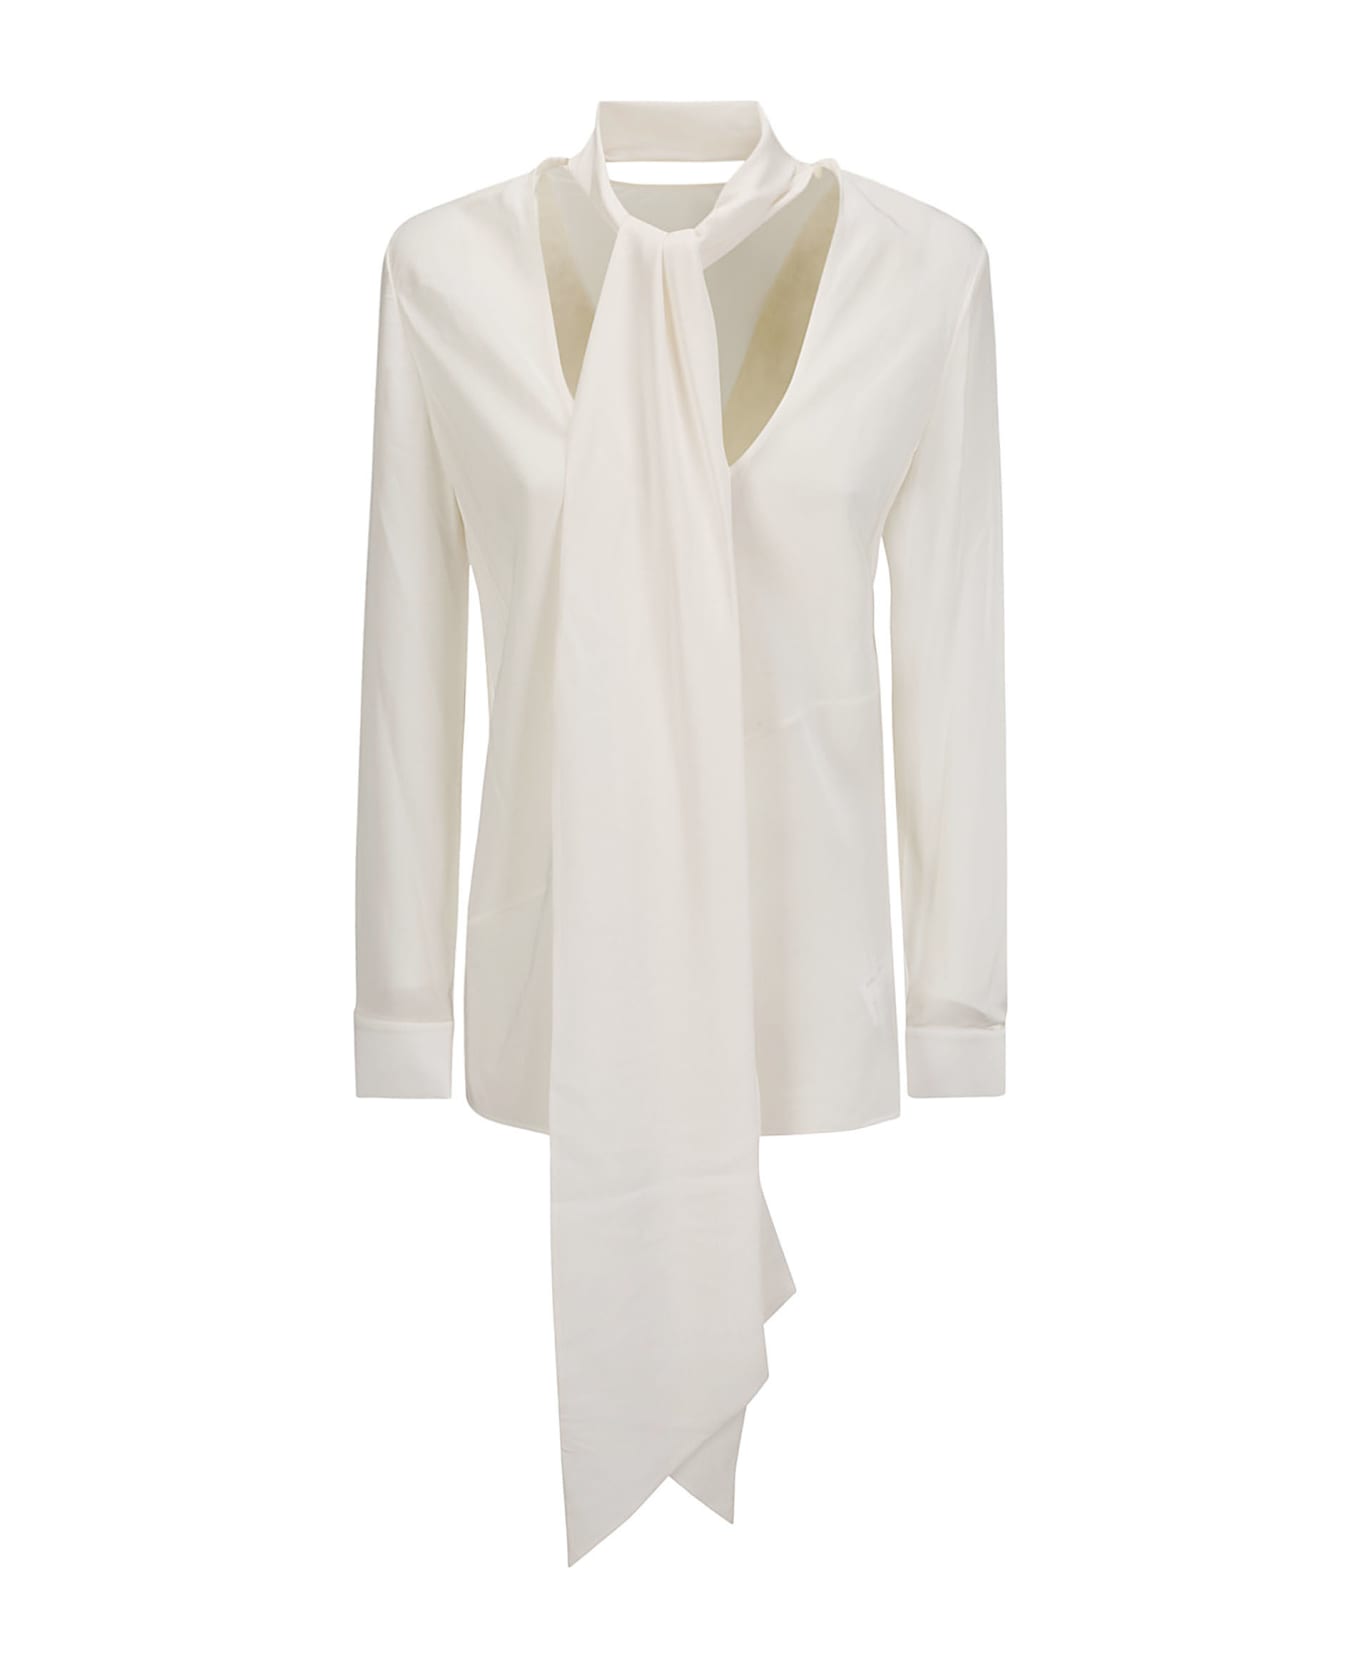 Helmut Lang Scarf Top Rev - WHITE ブラウス